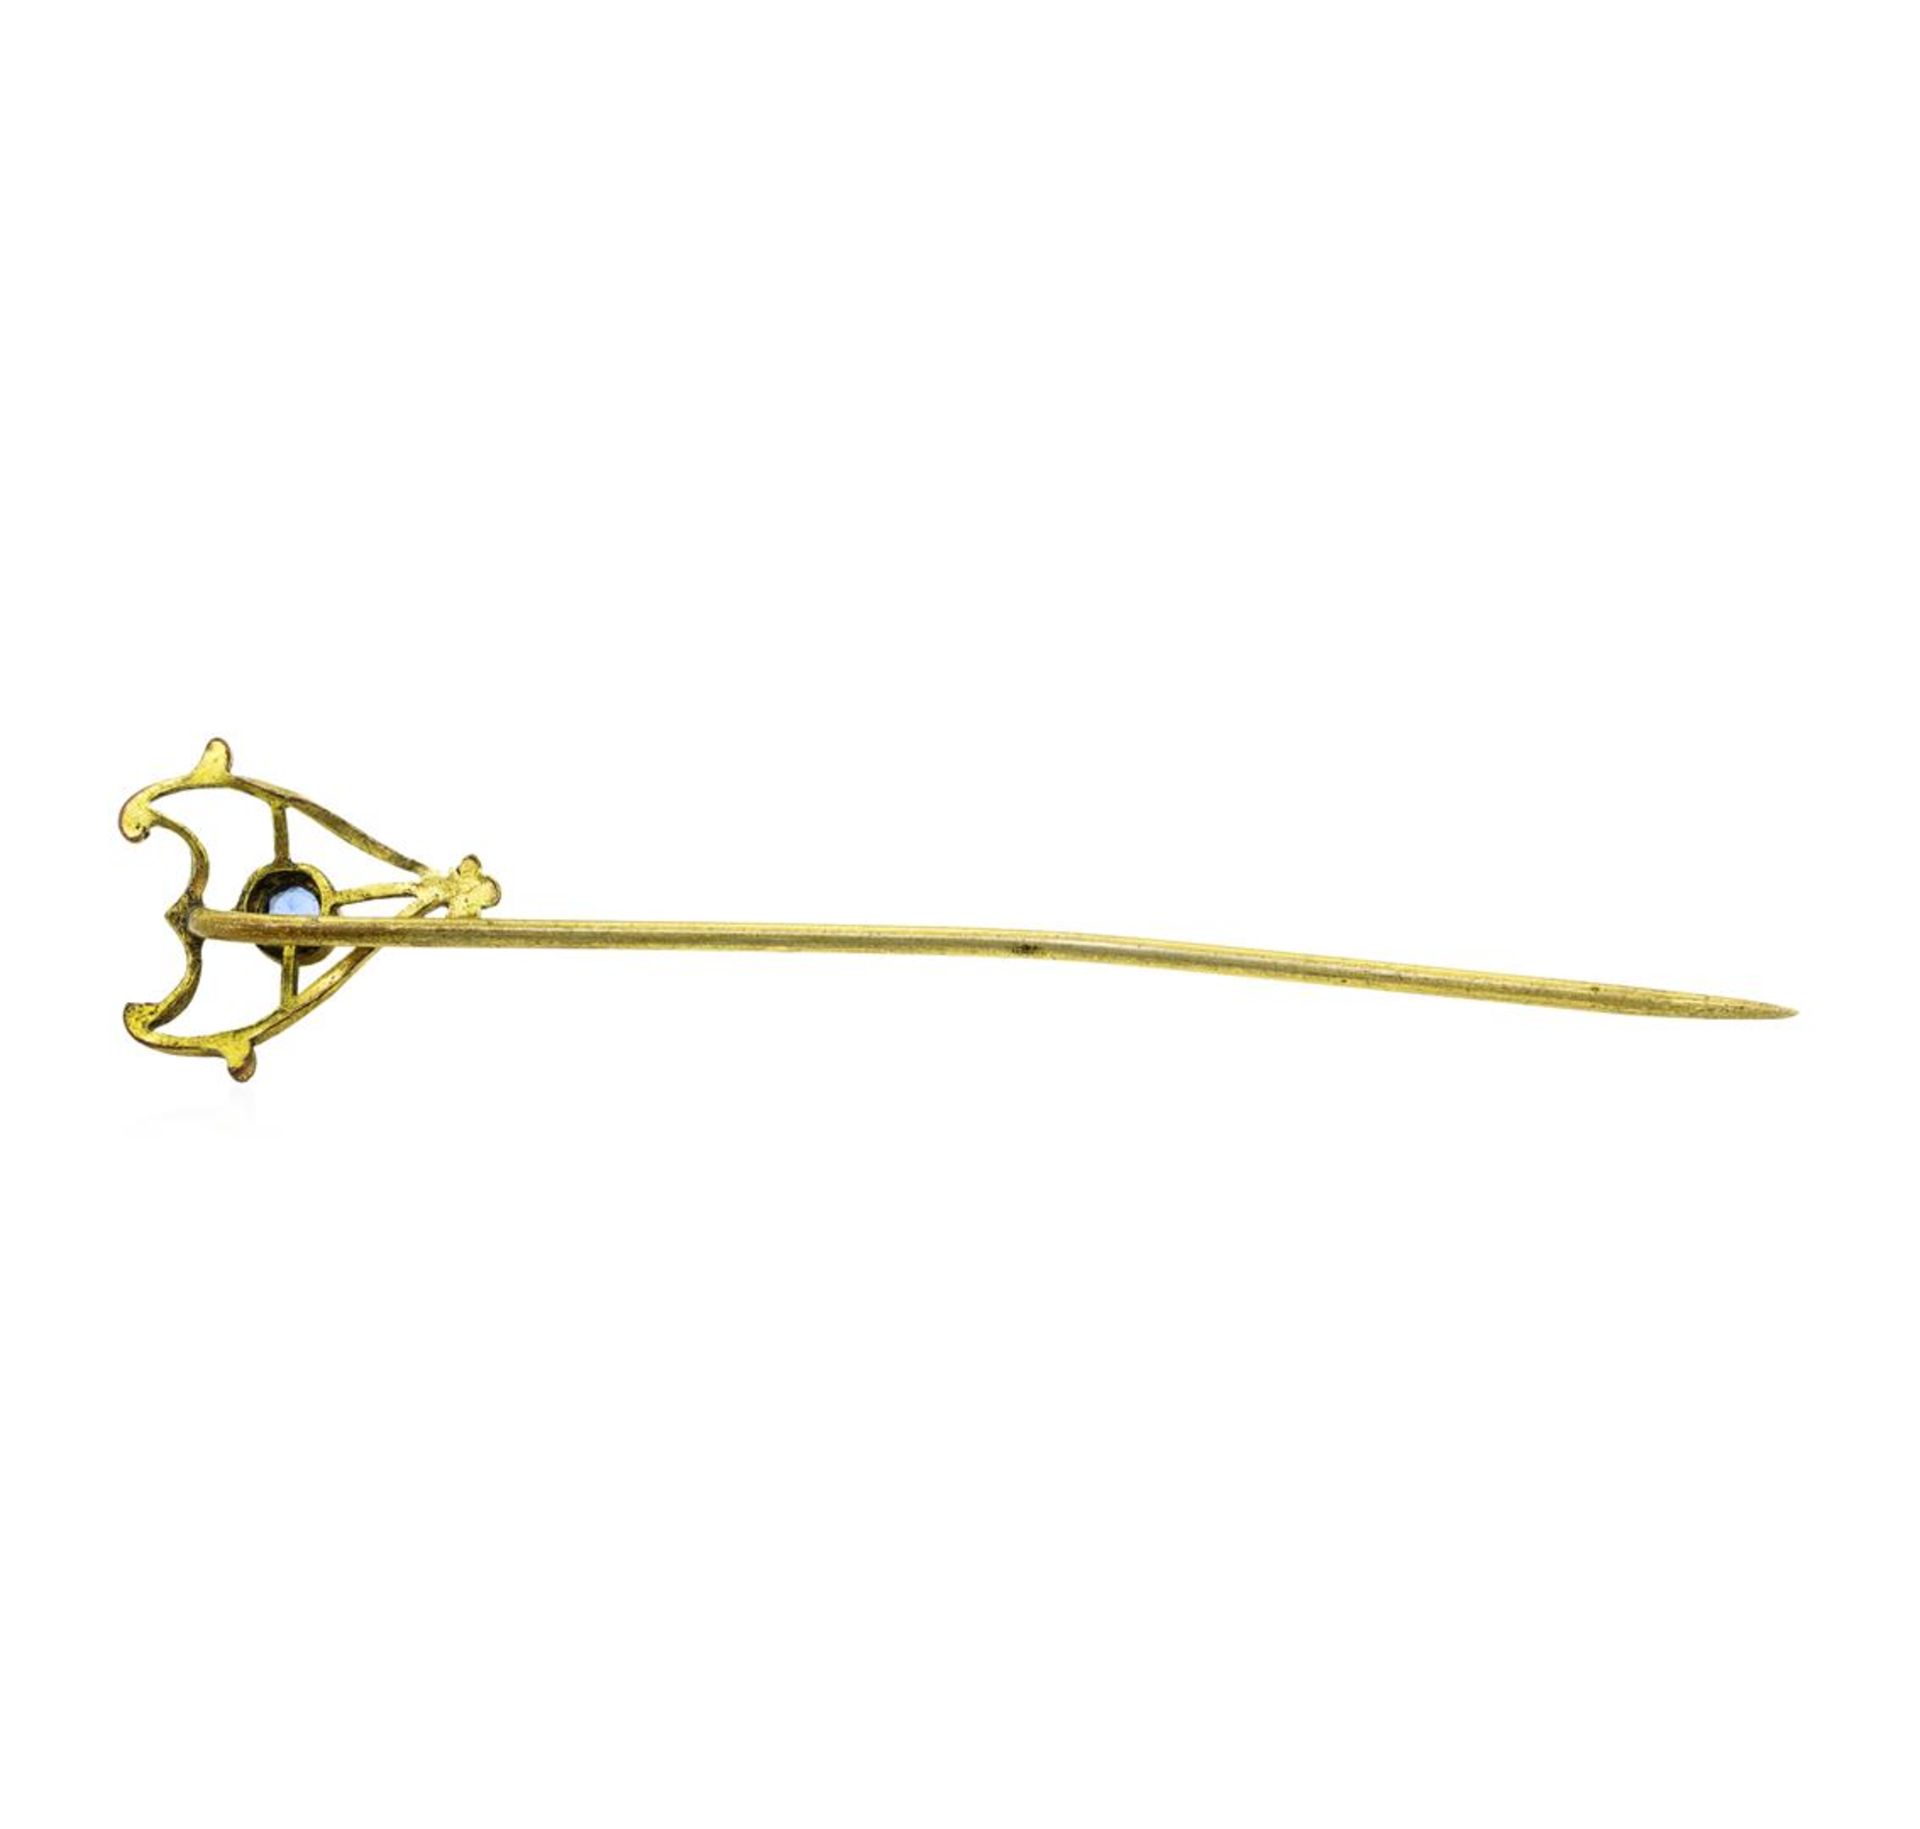 Blue Crystal Stick Pin - Yellow Gold Plated - Image 2 of 2